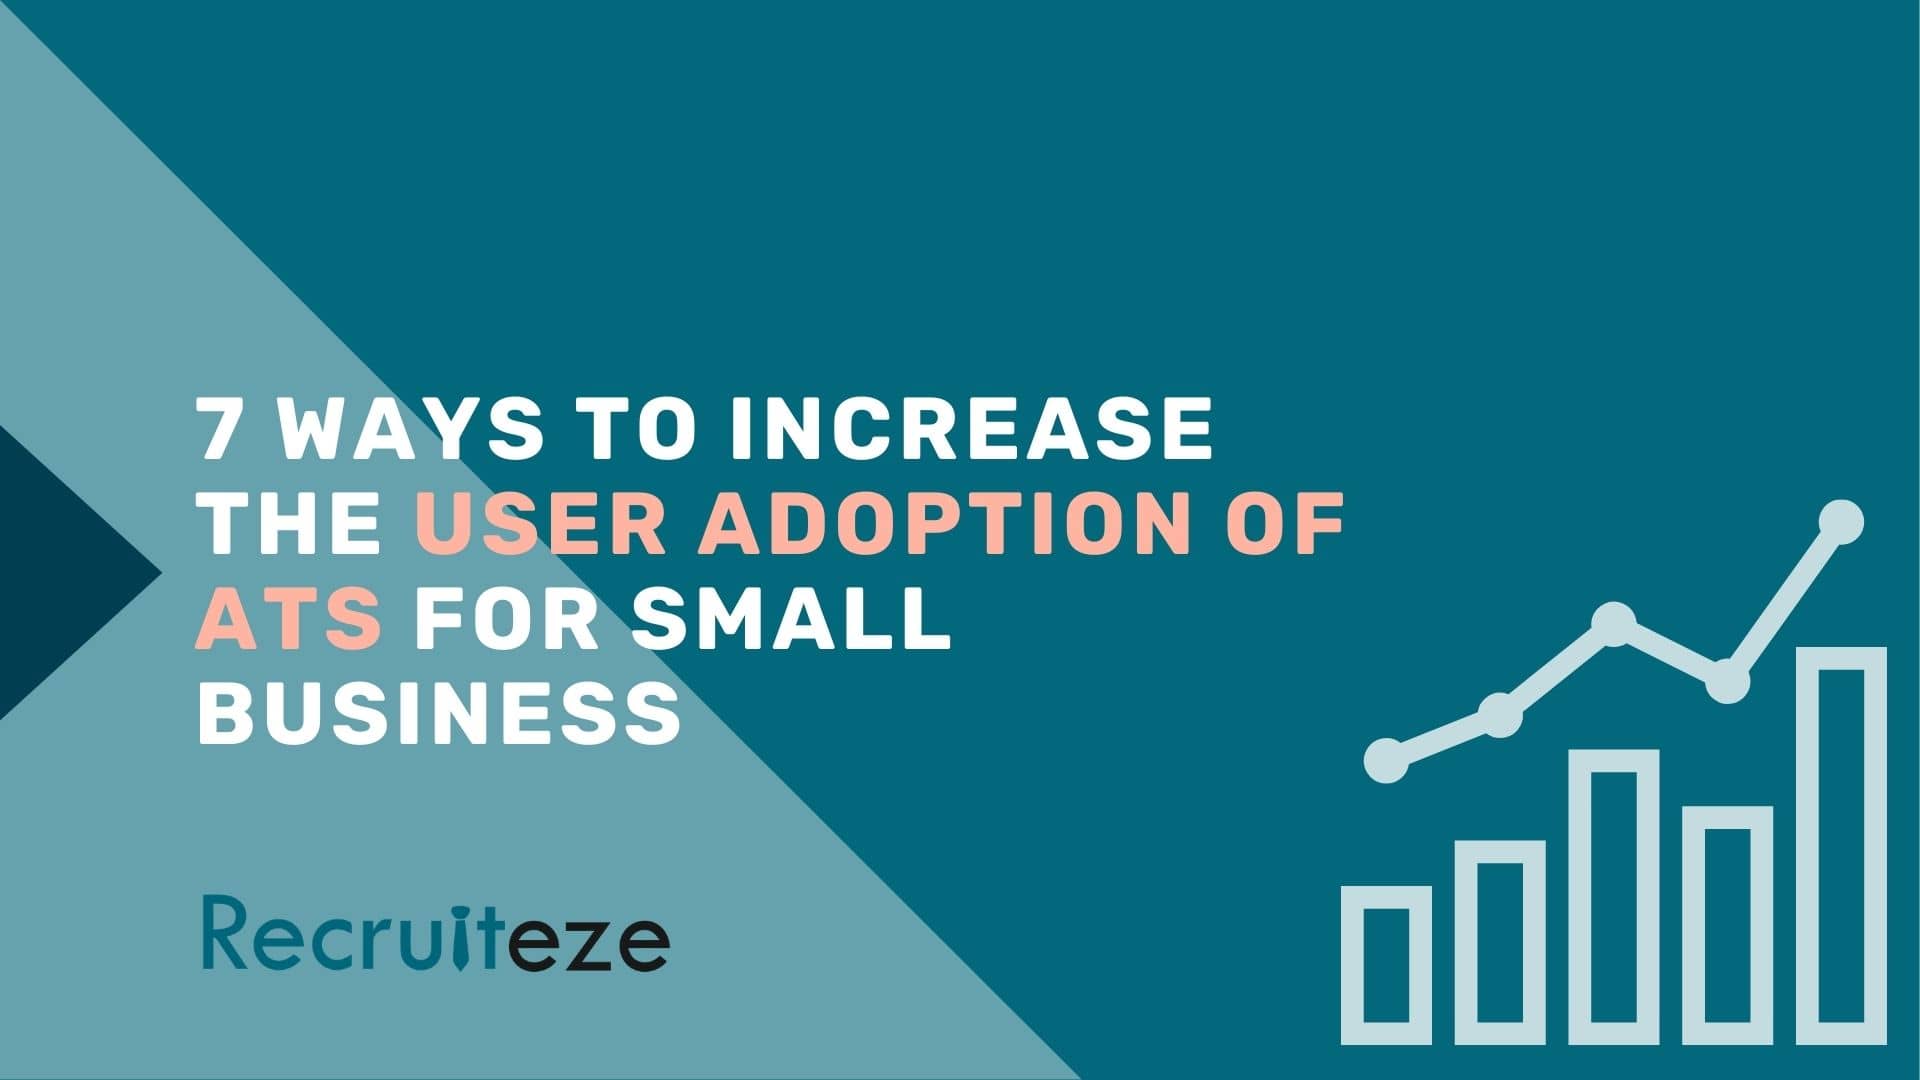 7 Ways to Increase the User Adoption of ATS for Small Business